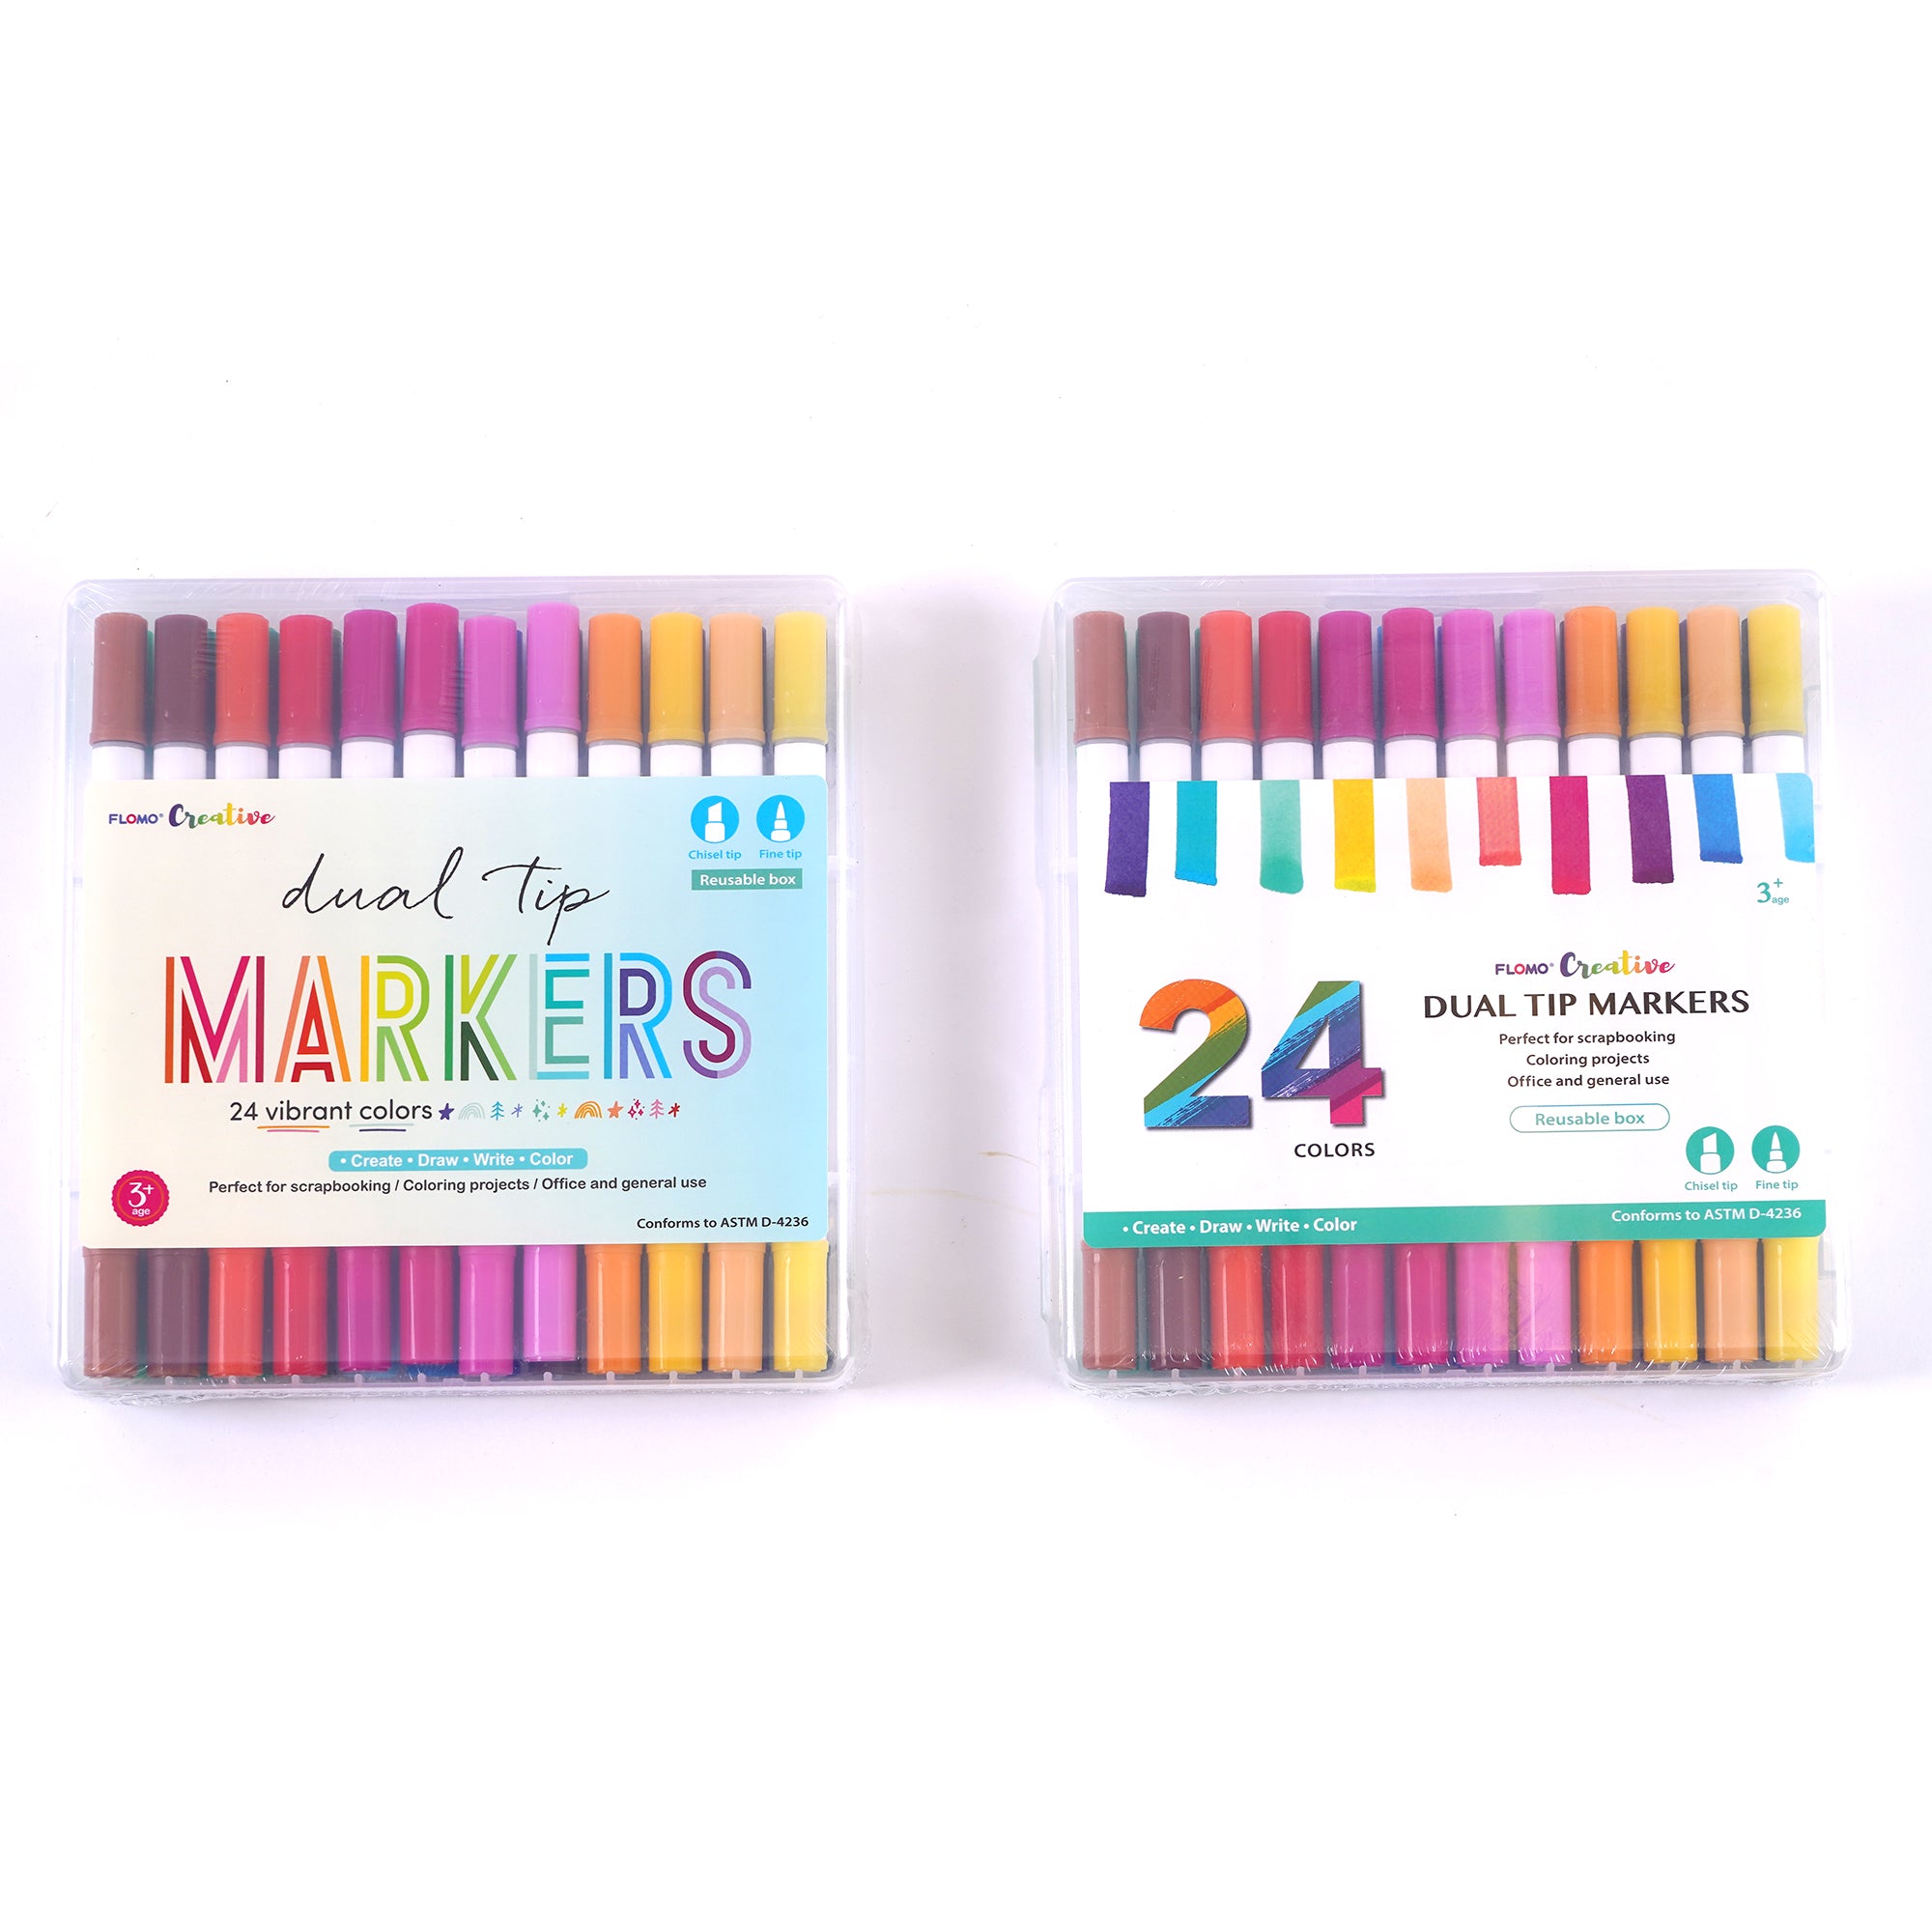 magic markers 9+1, 9 colors + 1 color-changing marker - 9 colors - oe